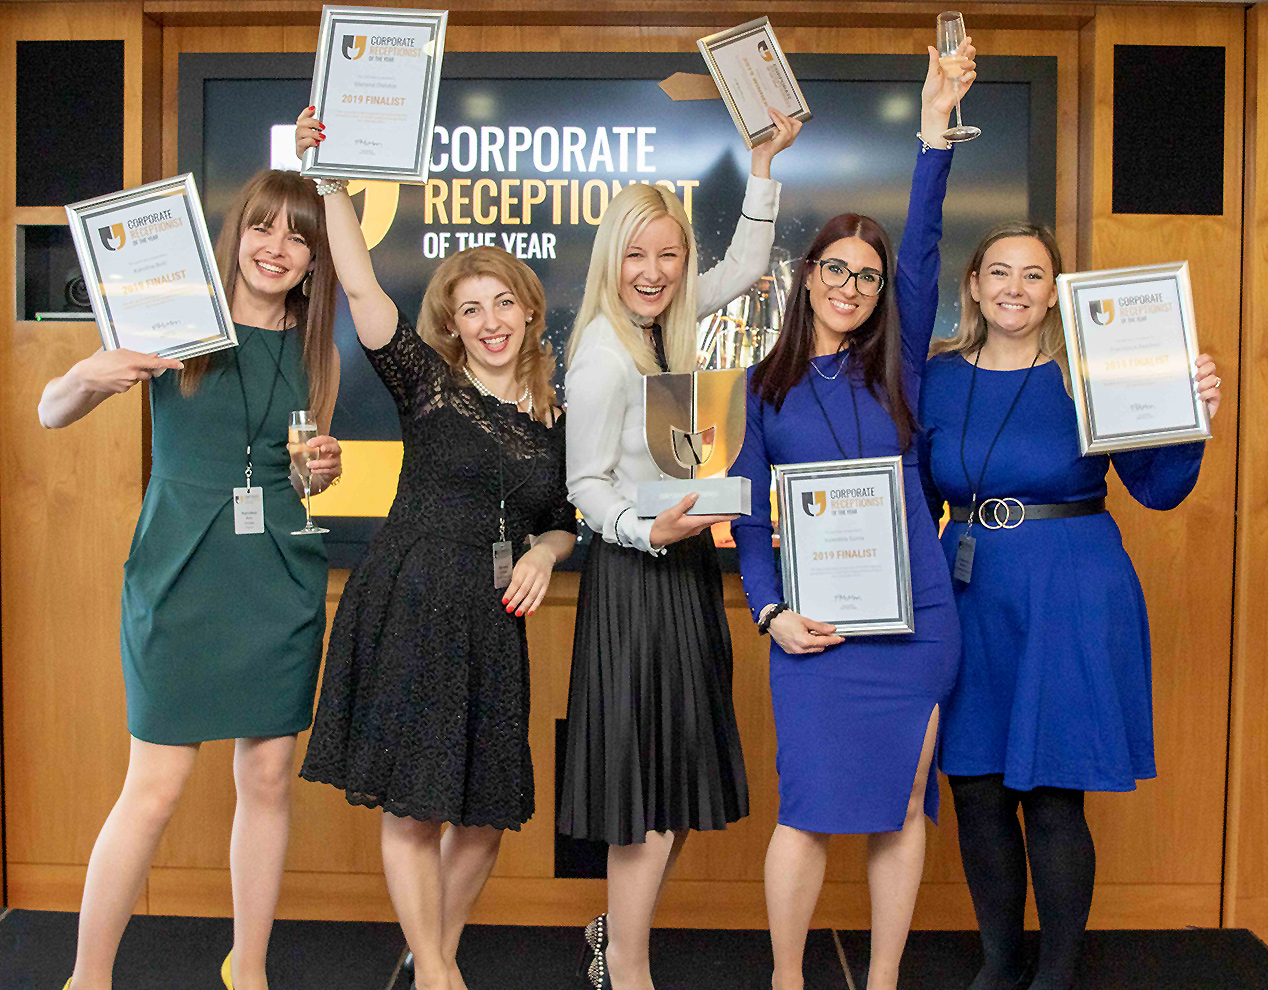 Rapport is proud to announce that we have five of our exceptional team out of the ten shortlisted for Corporate Receptionist of the Year 2019